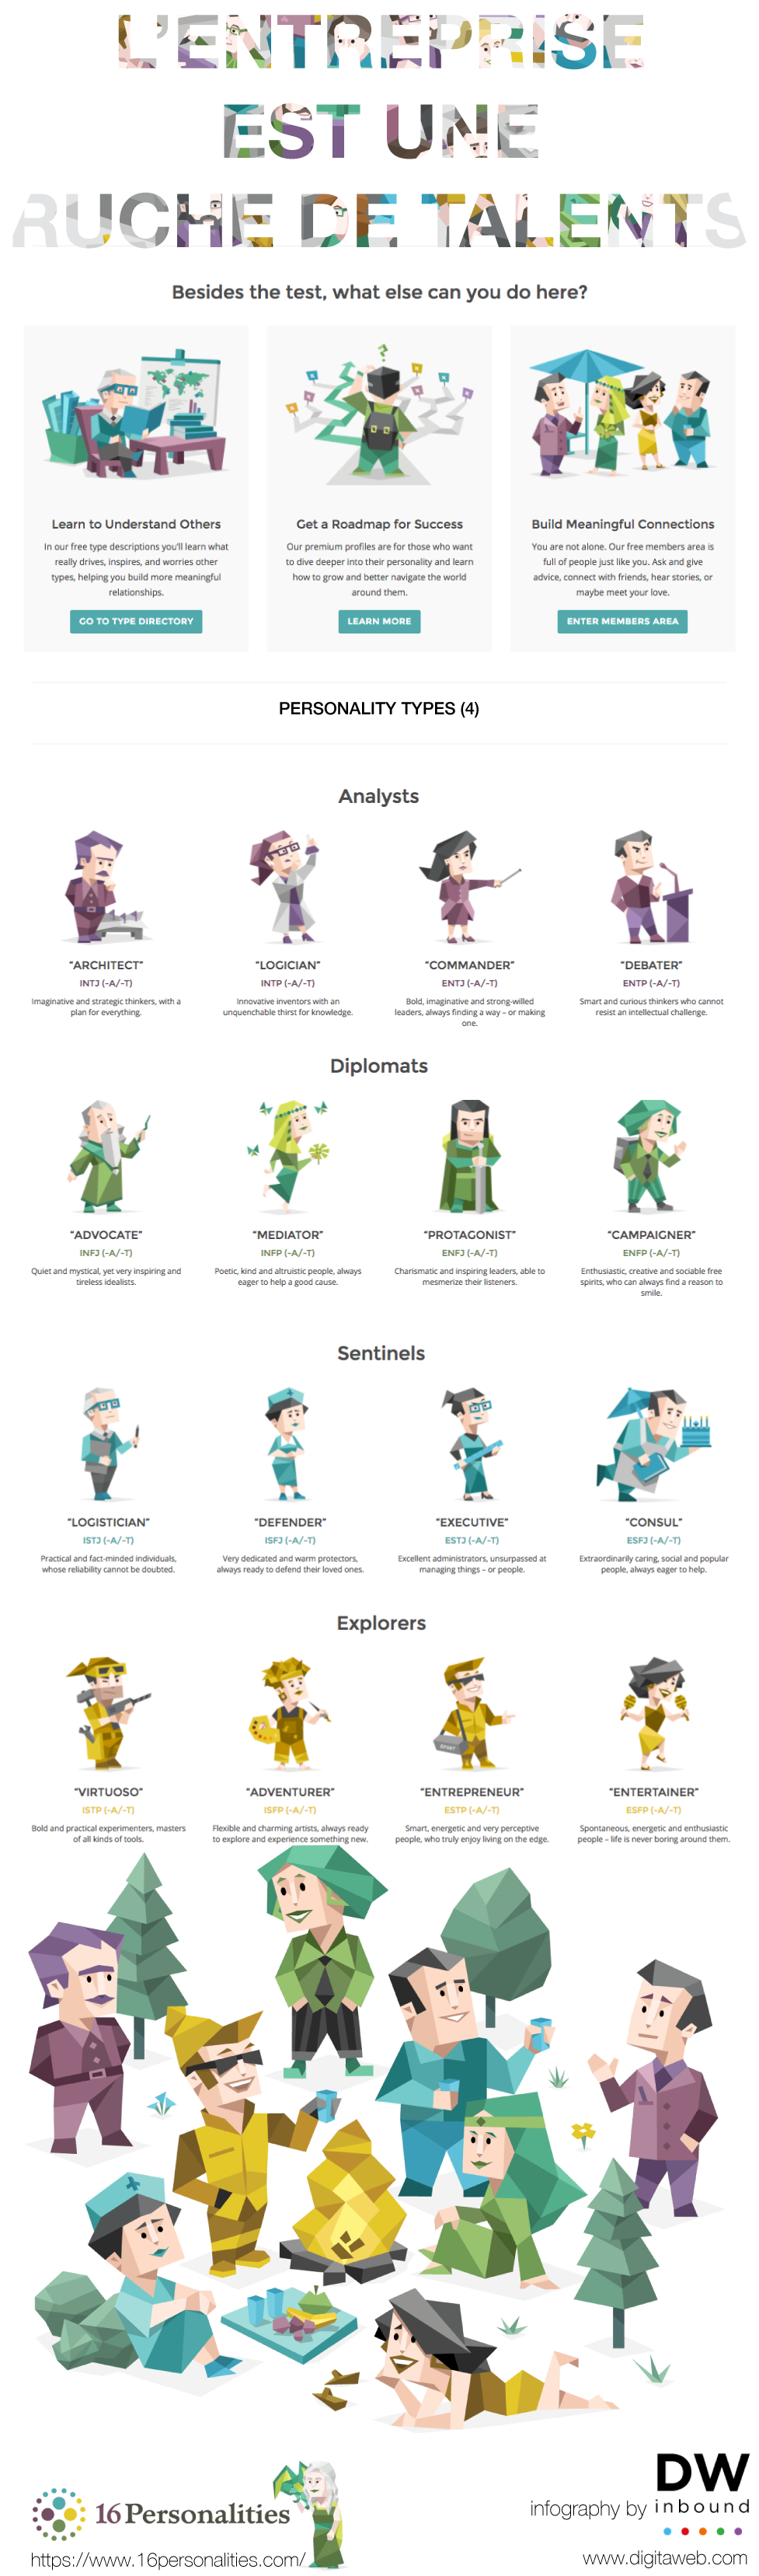 test-16-PERSONALITIES.png